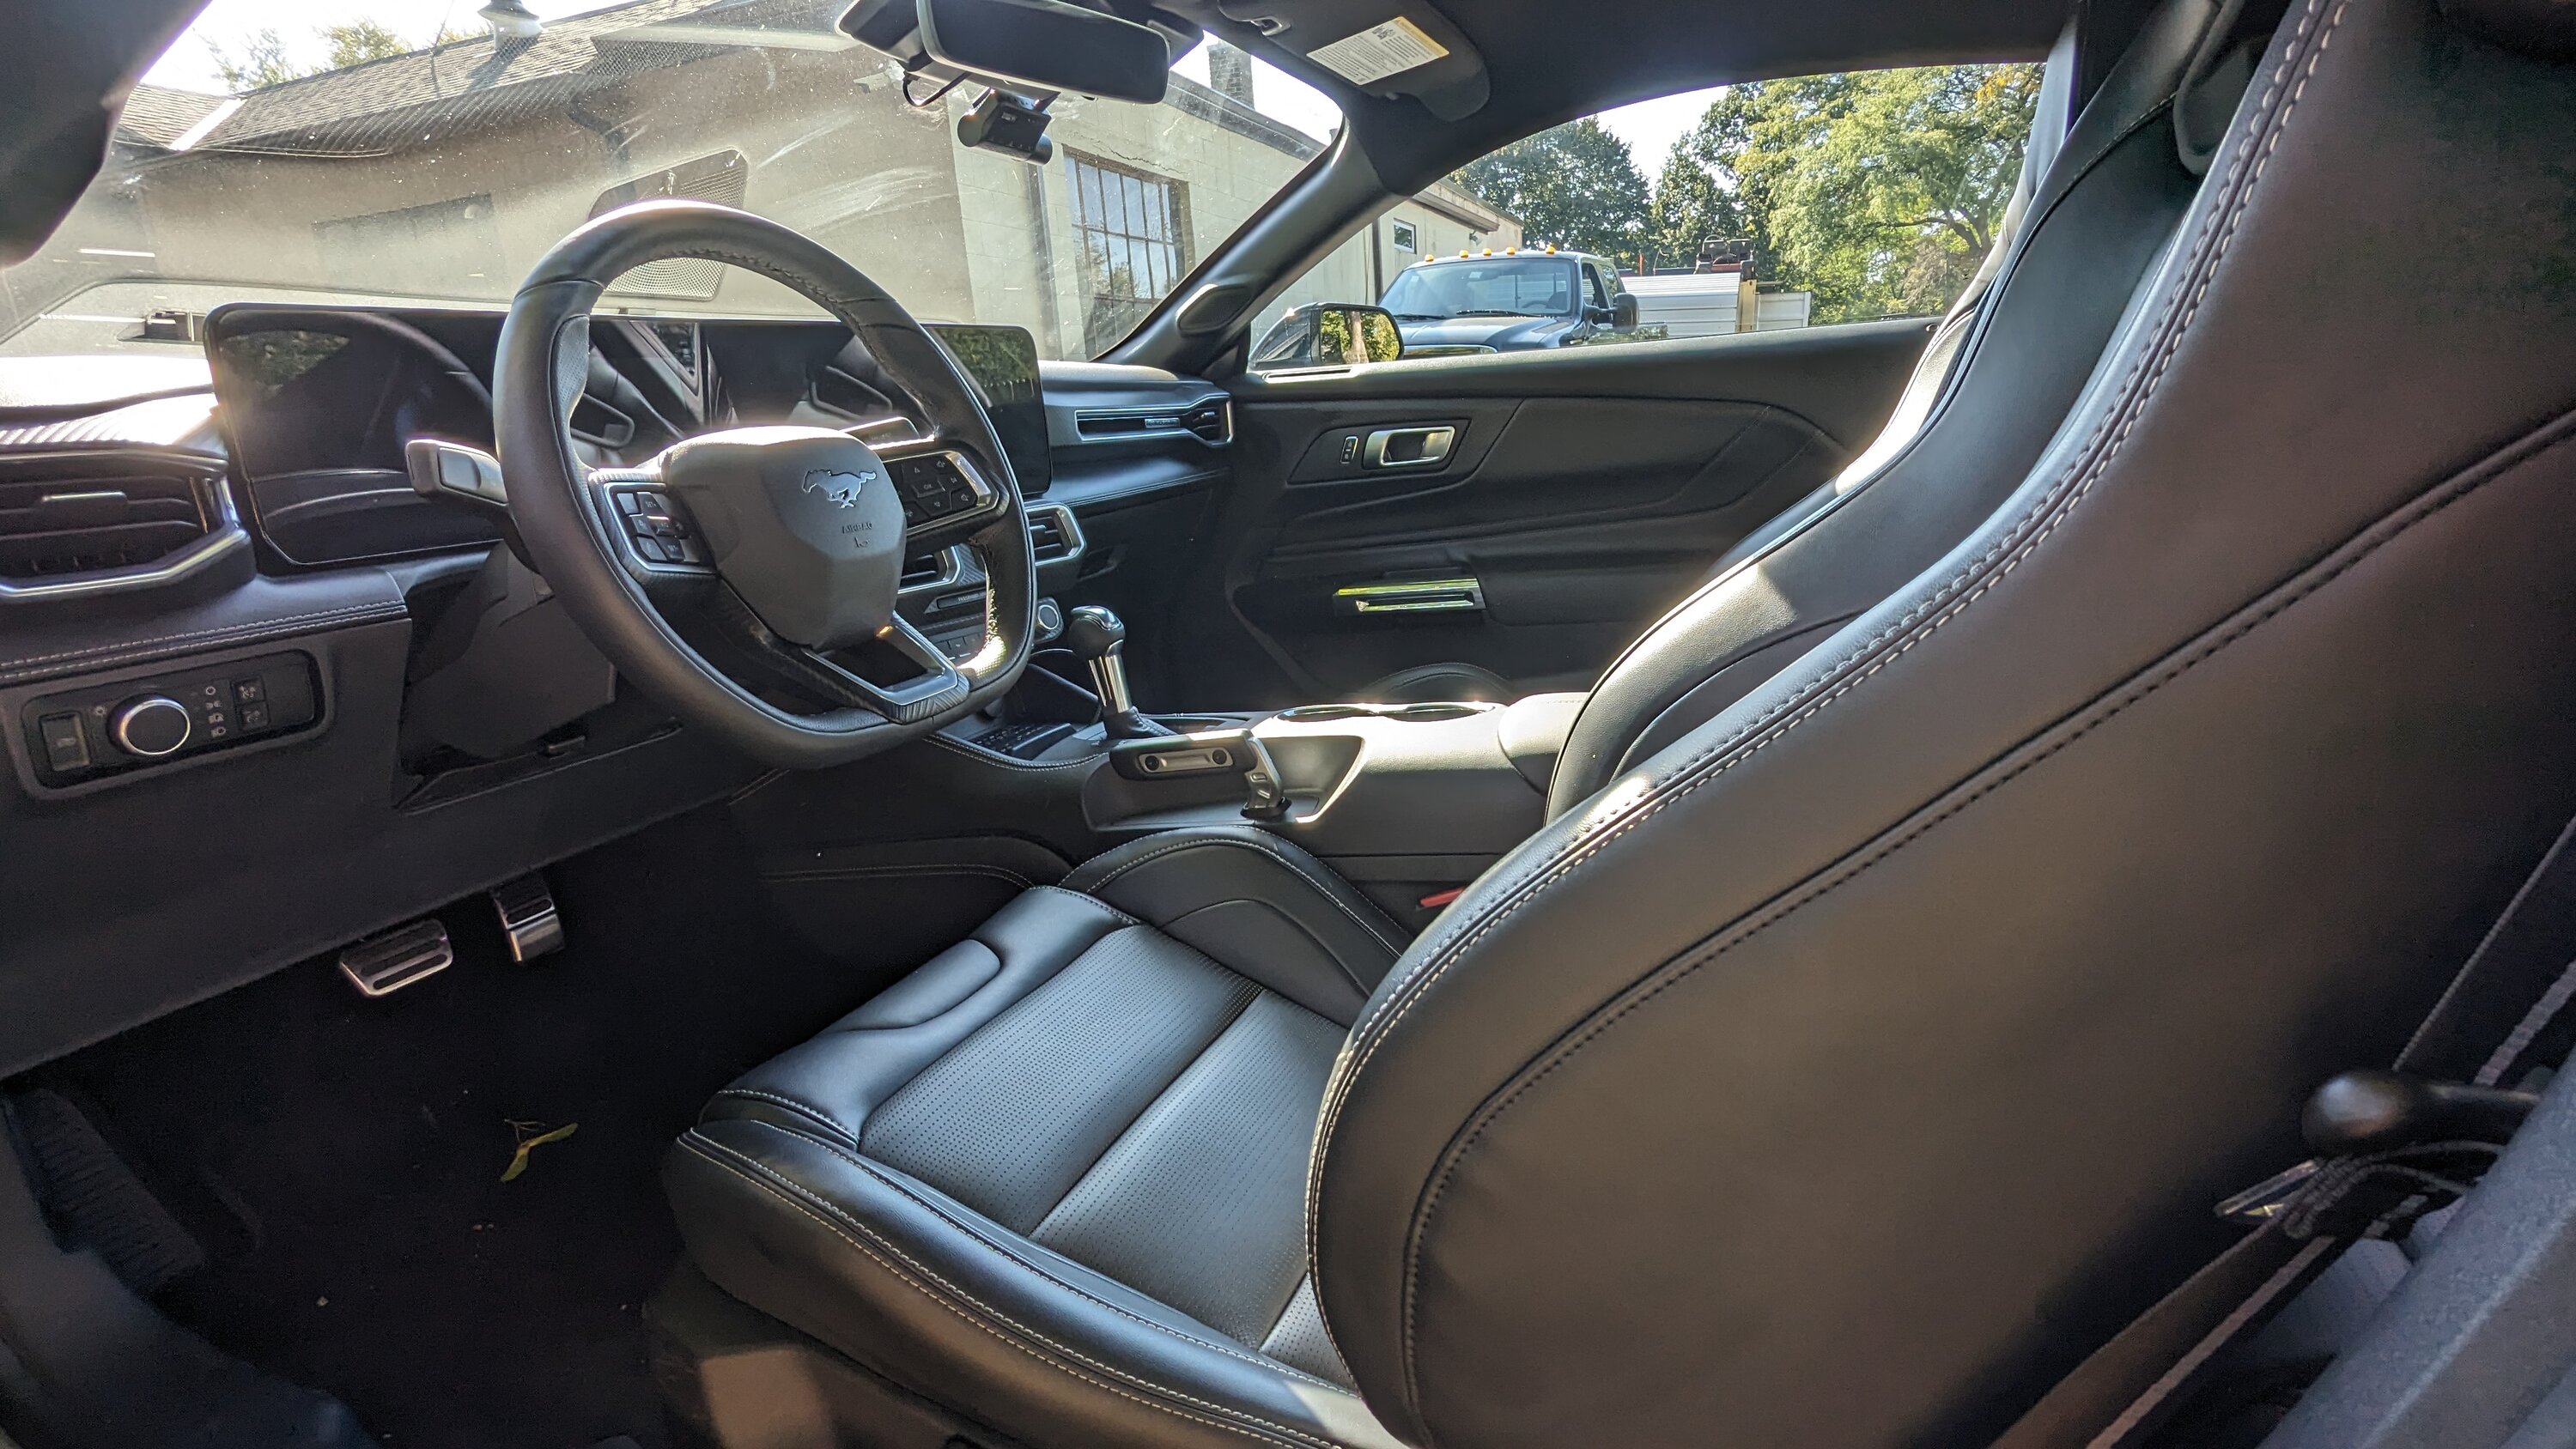 S650 Mustang Let’s post interior photos here! PXL_20231002_201508153